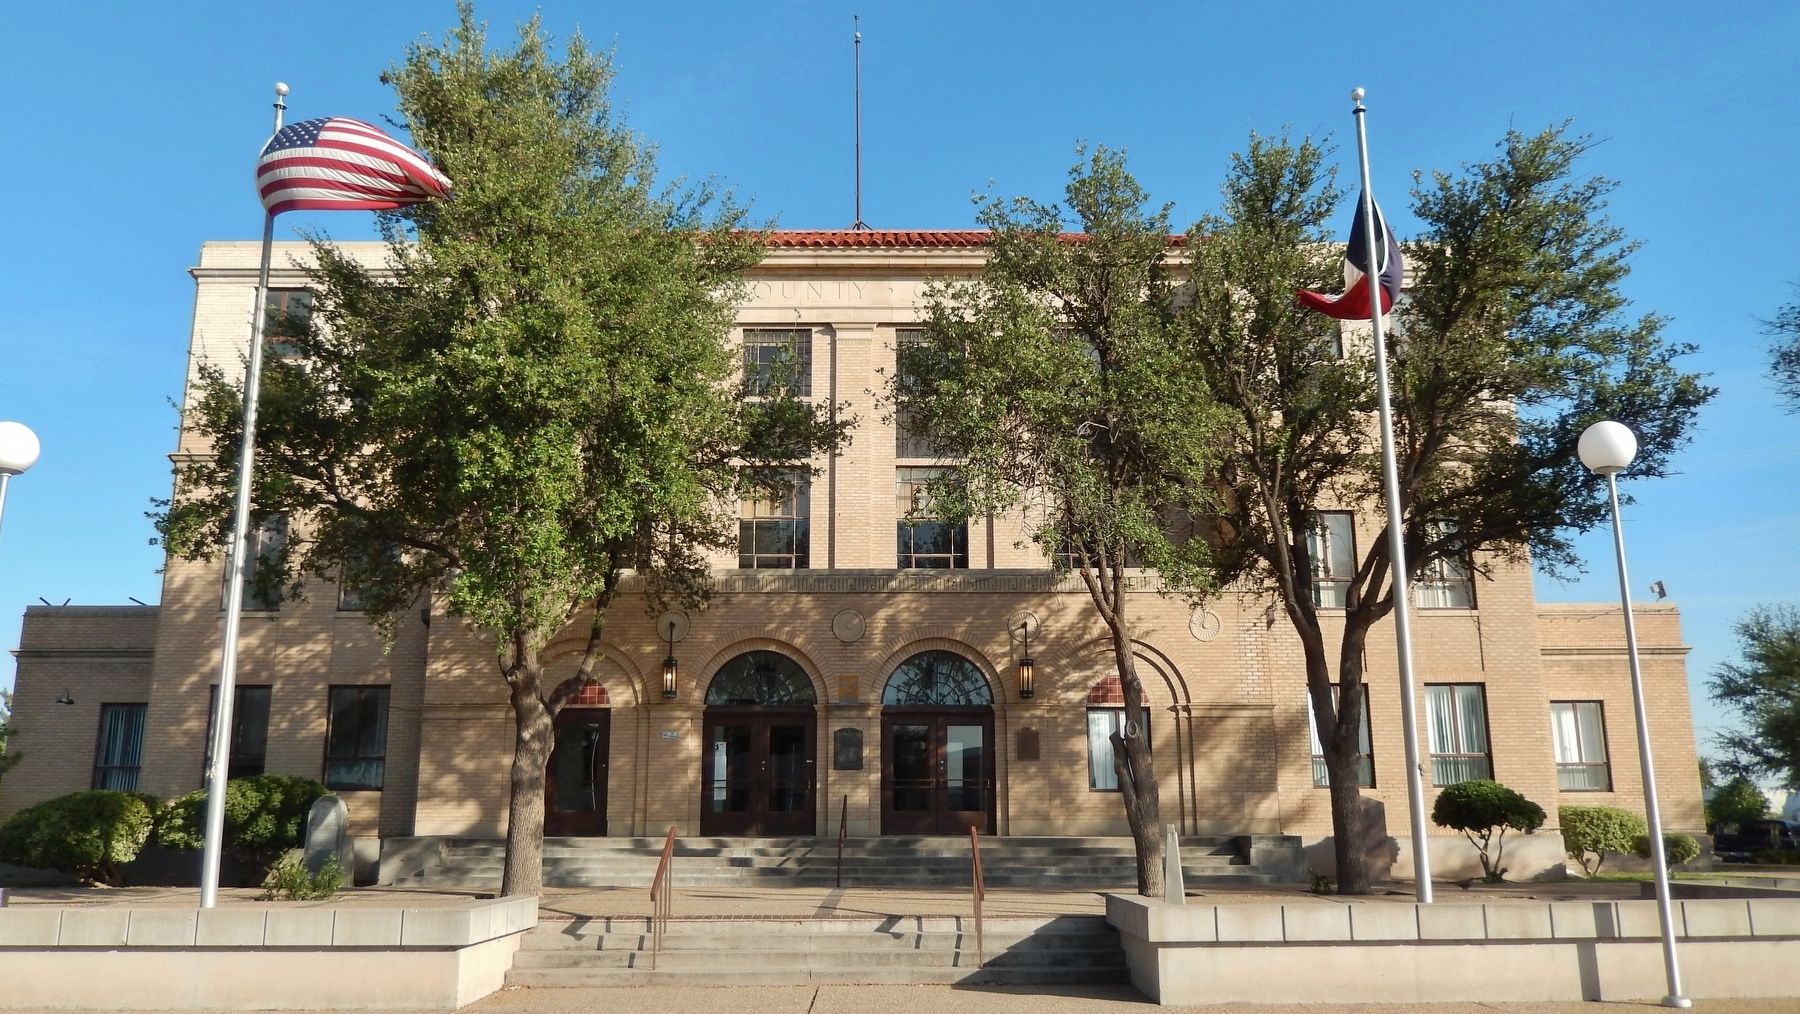 Reeves County Courthouse (<i>marker visible on right side of front entrance</i>) image. Click for full size.